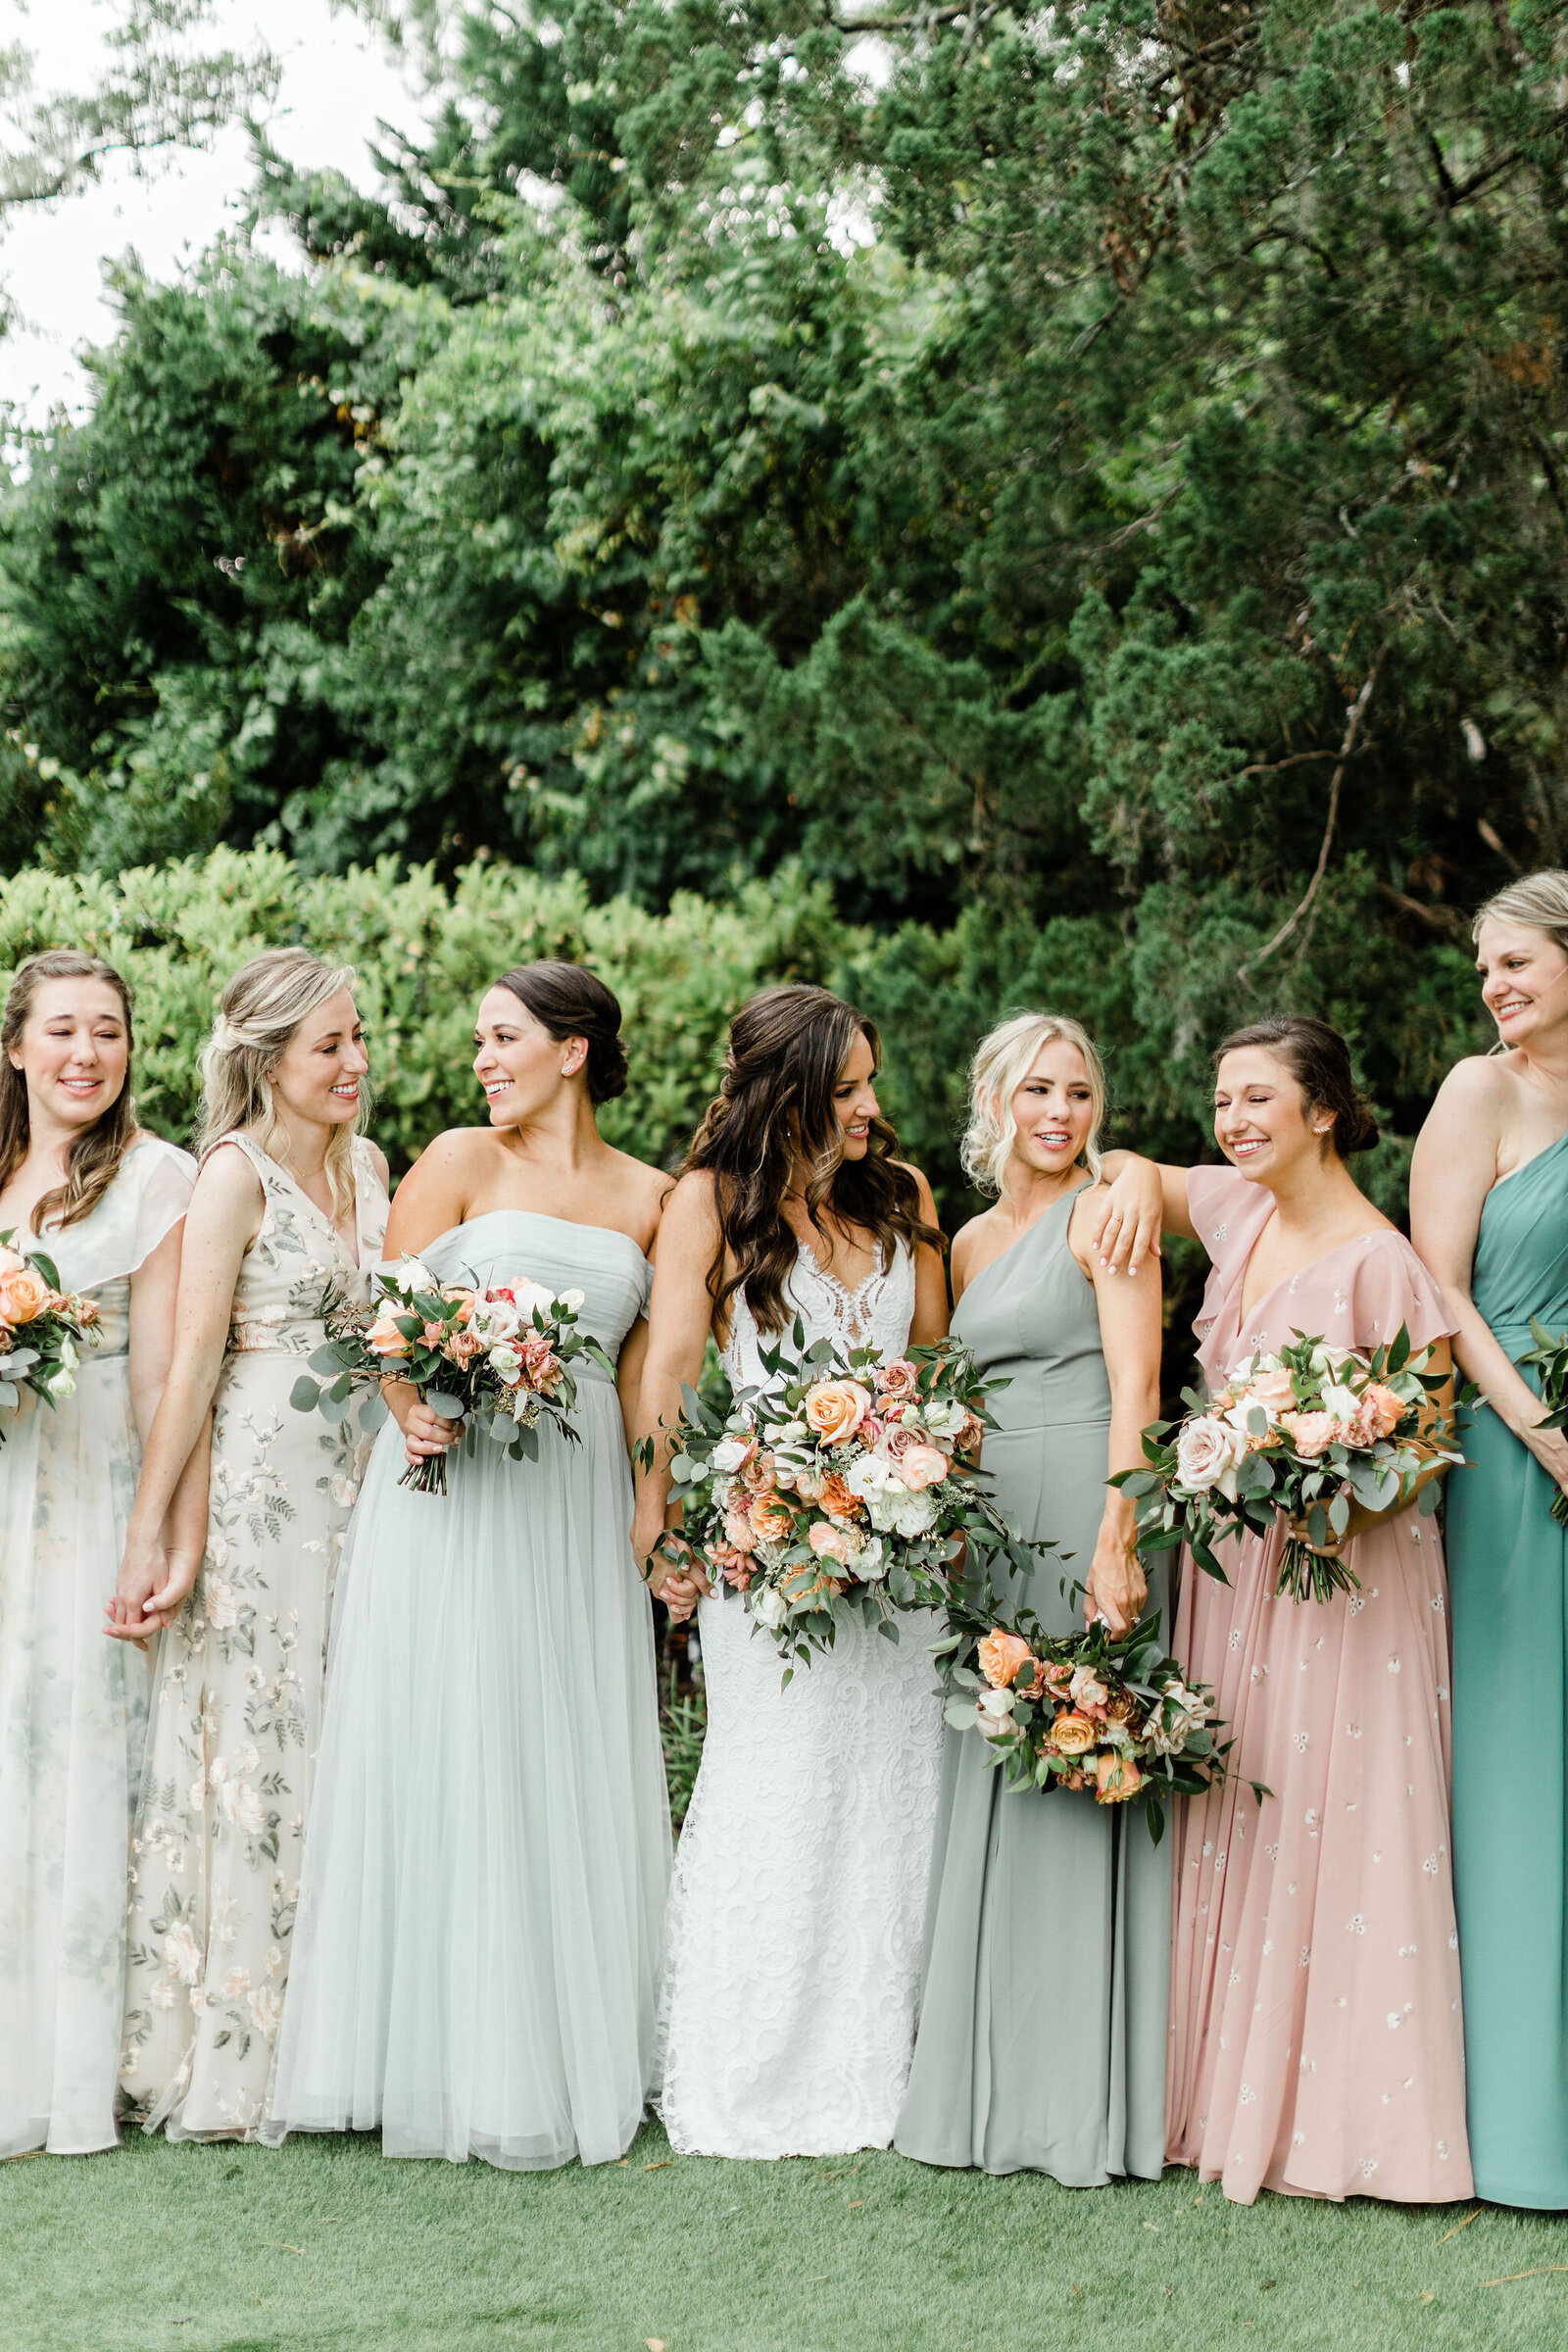 Bridesmaids Photos | Wrightsville Manor, Wrightsville Beach NC | The Axtells Photo and Film